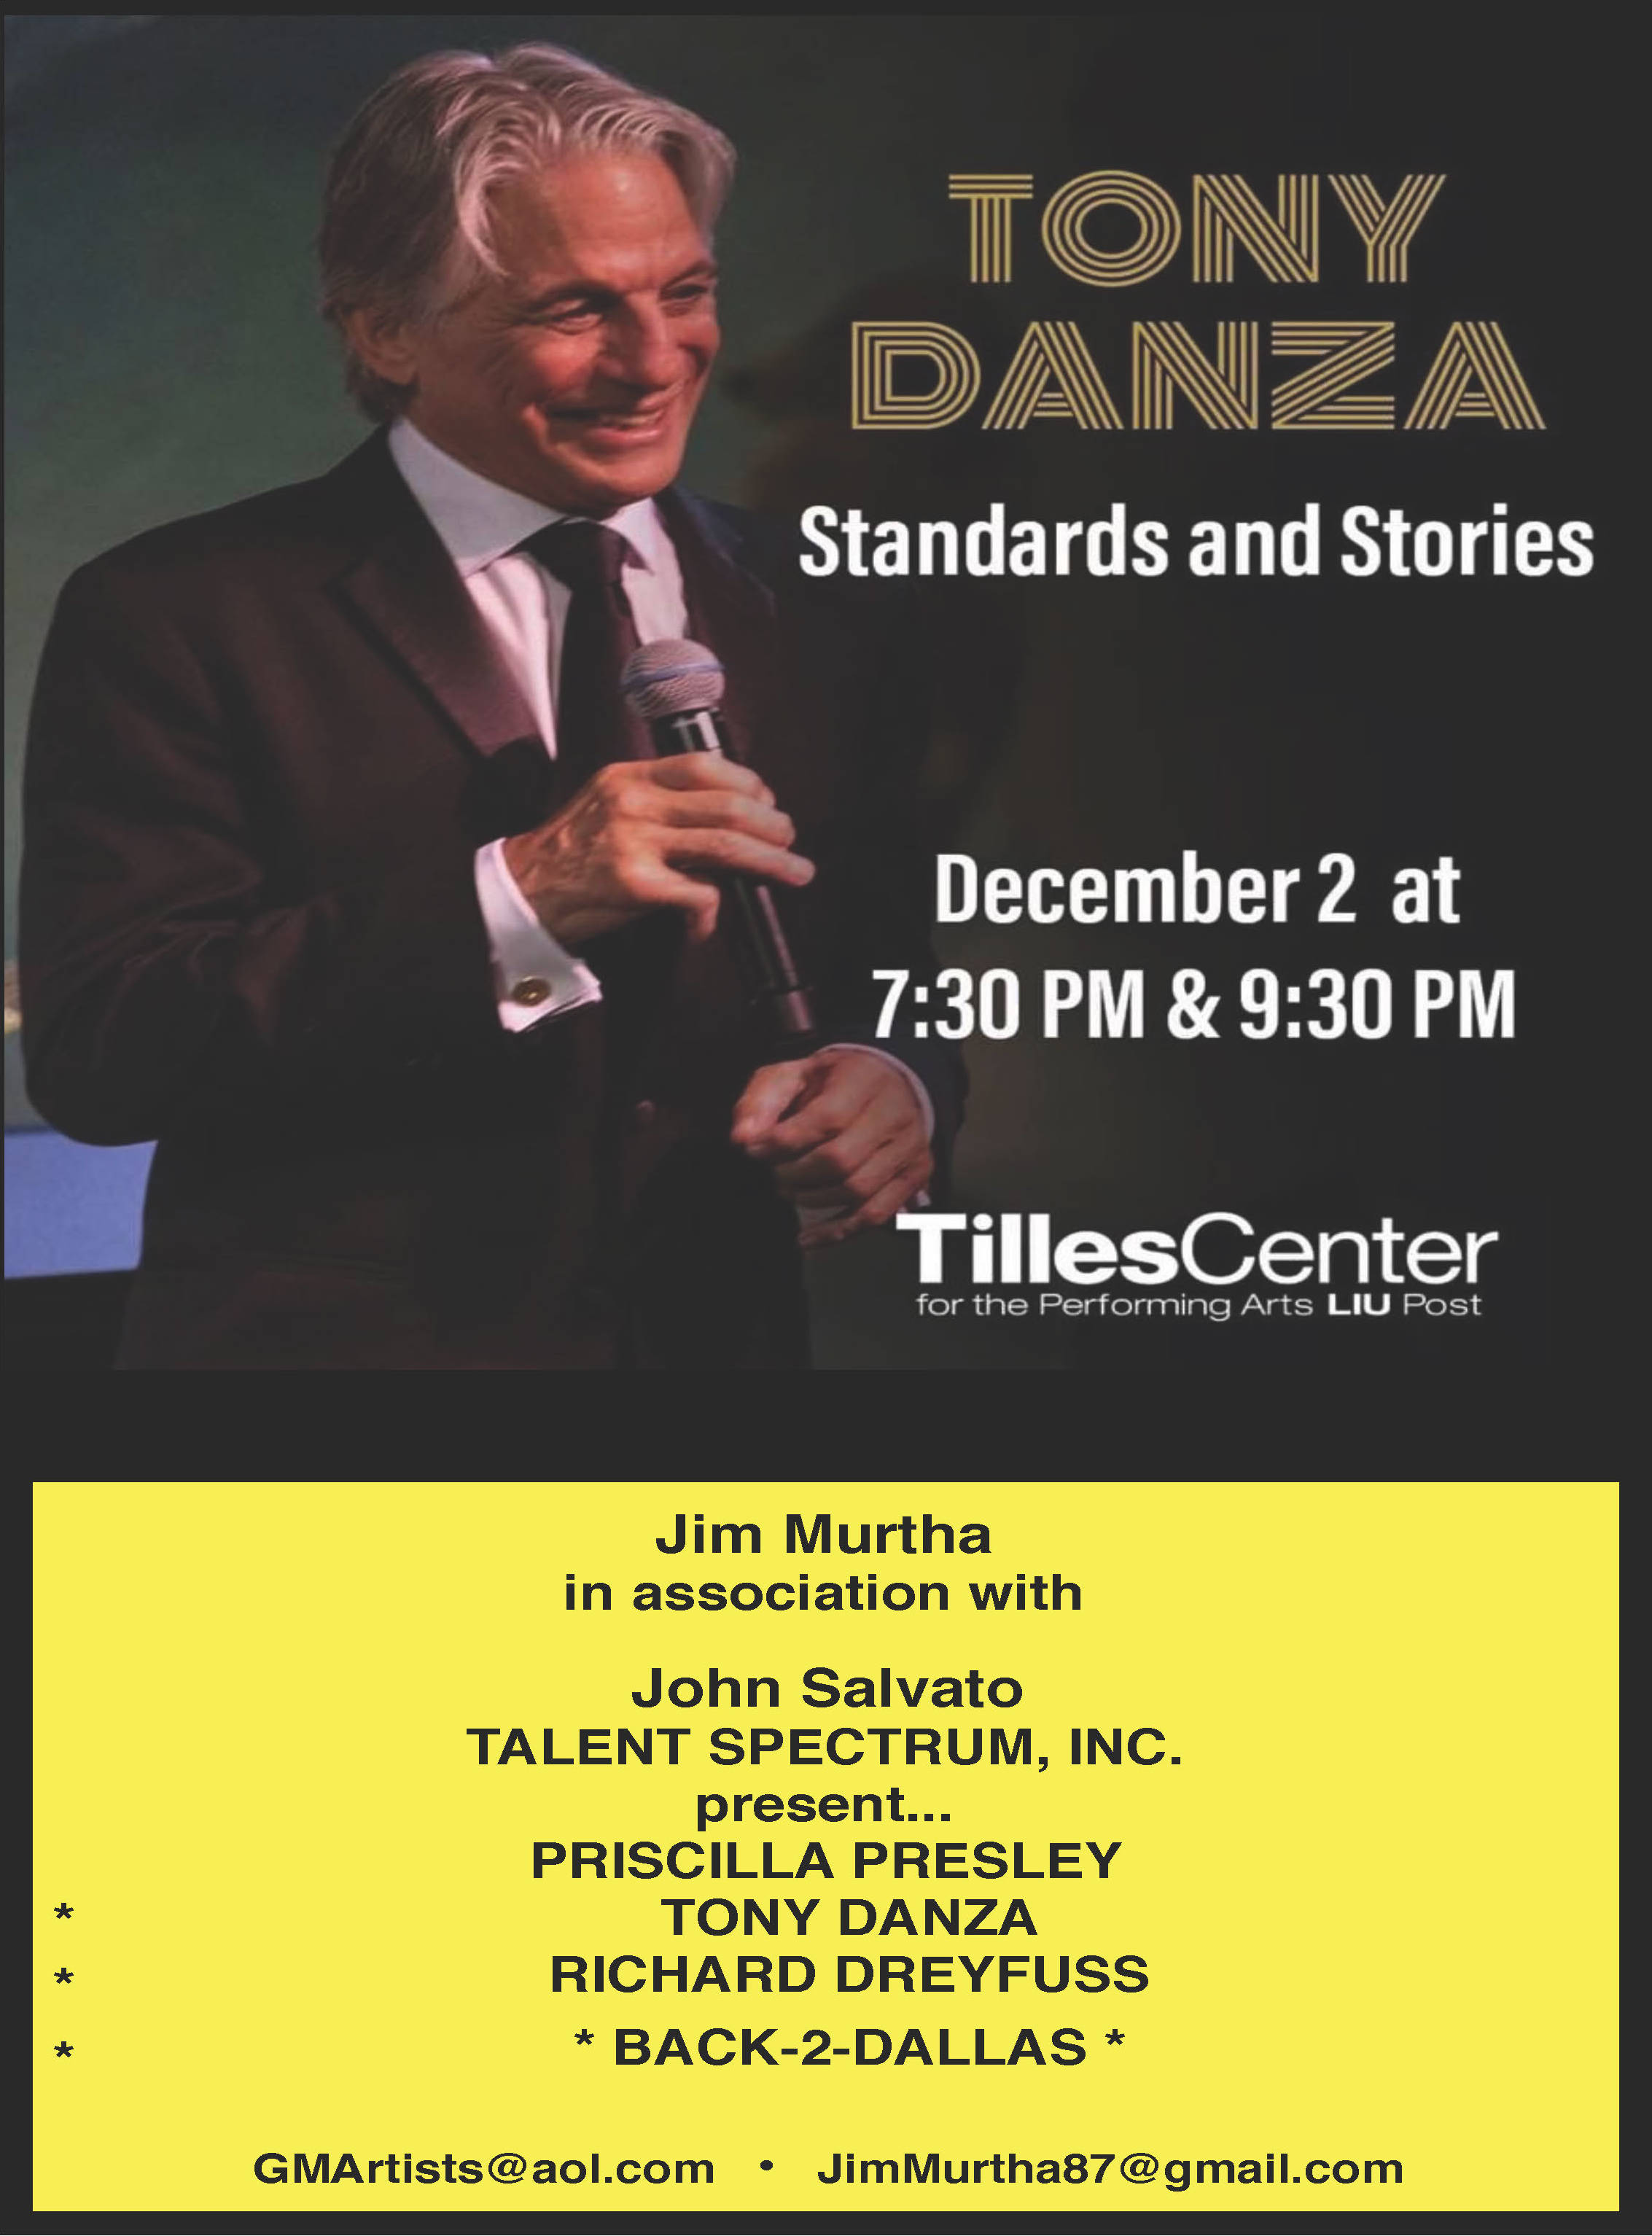 Tony Danza; Standards and Stories; December 2 at 7:30 PM & 9:30 PM